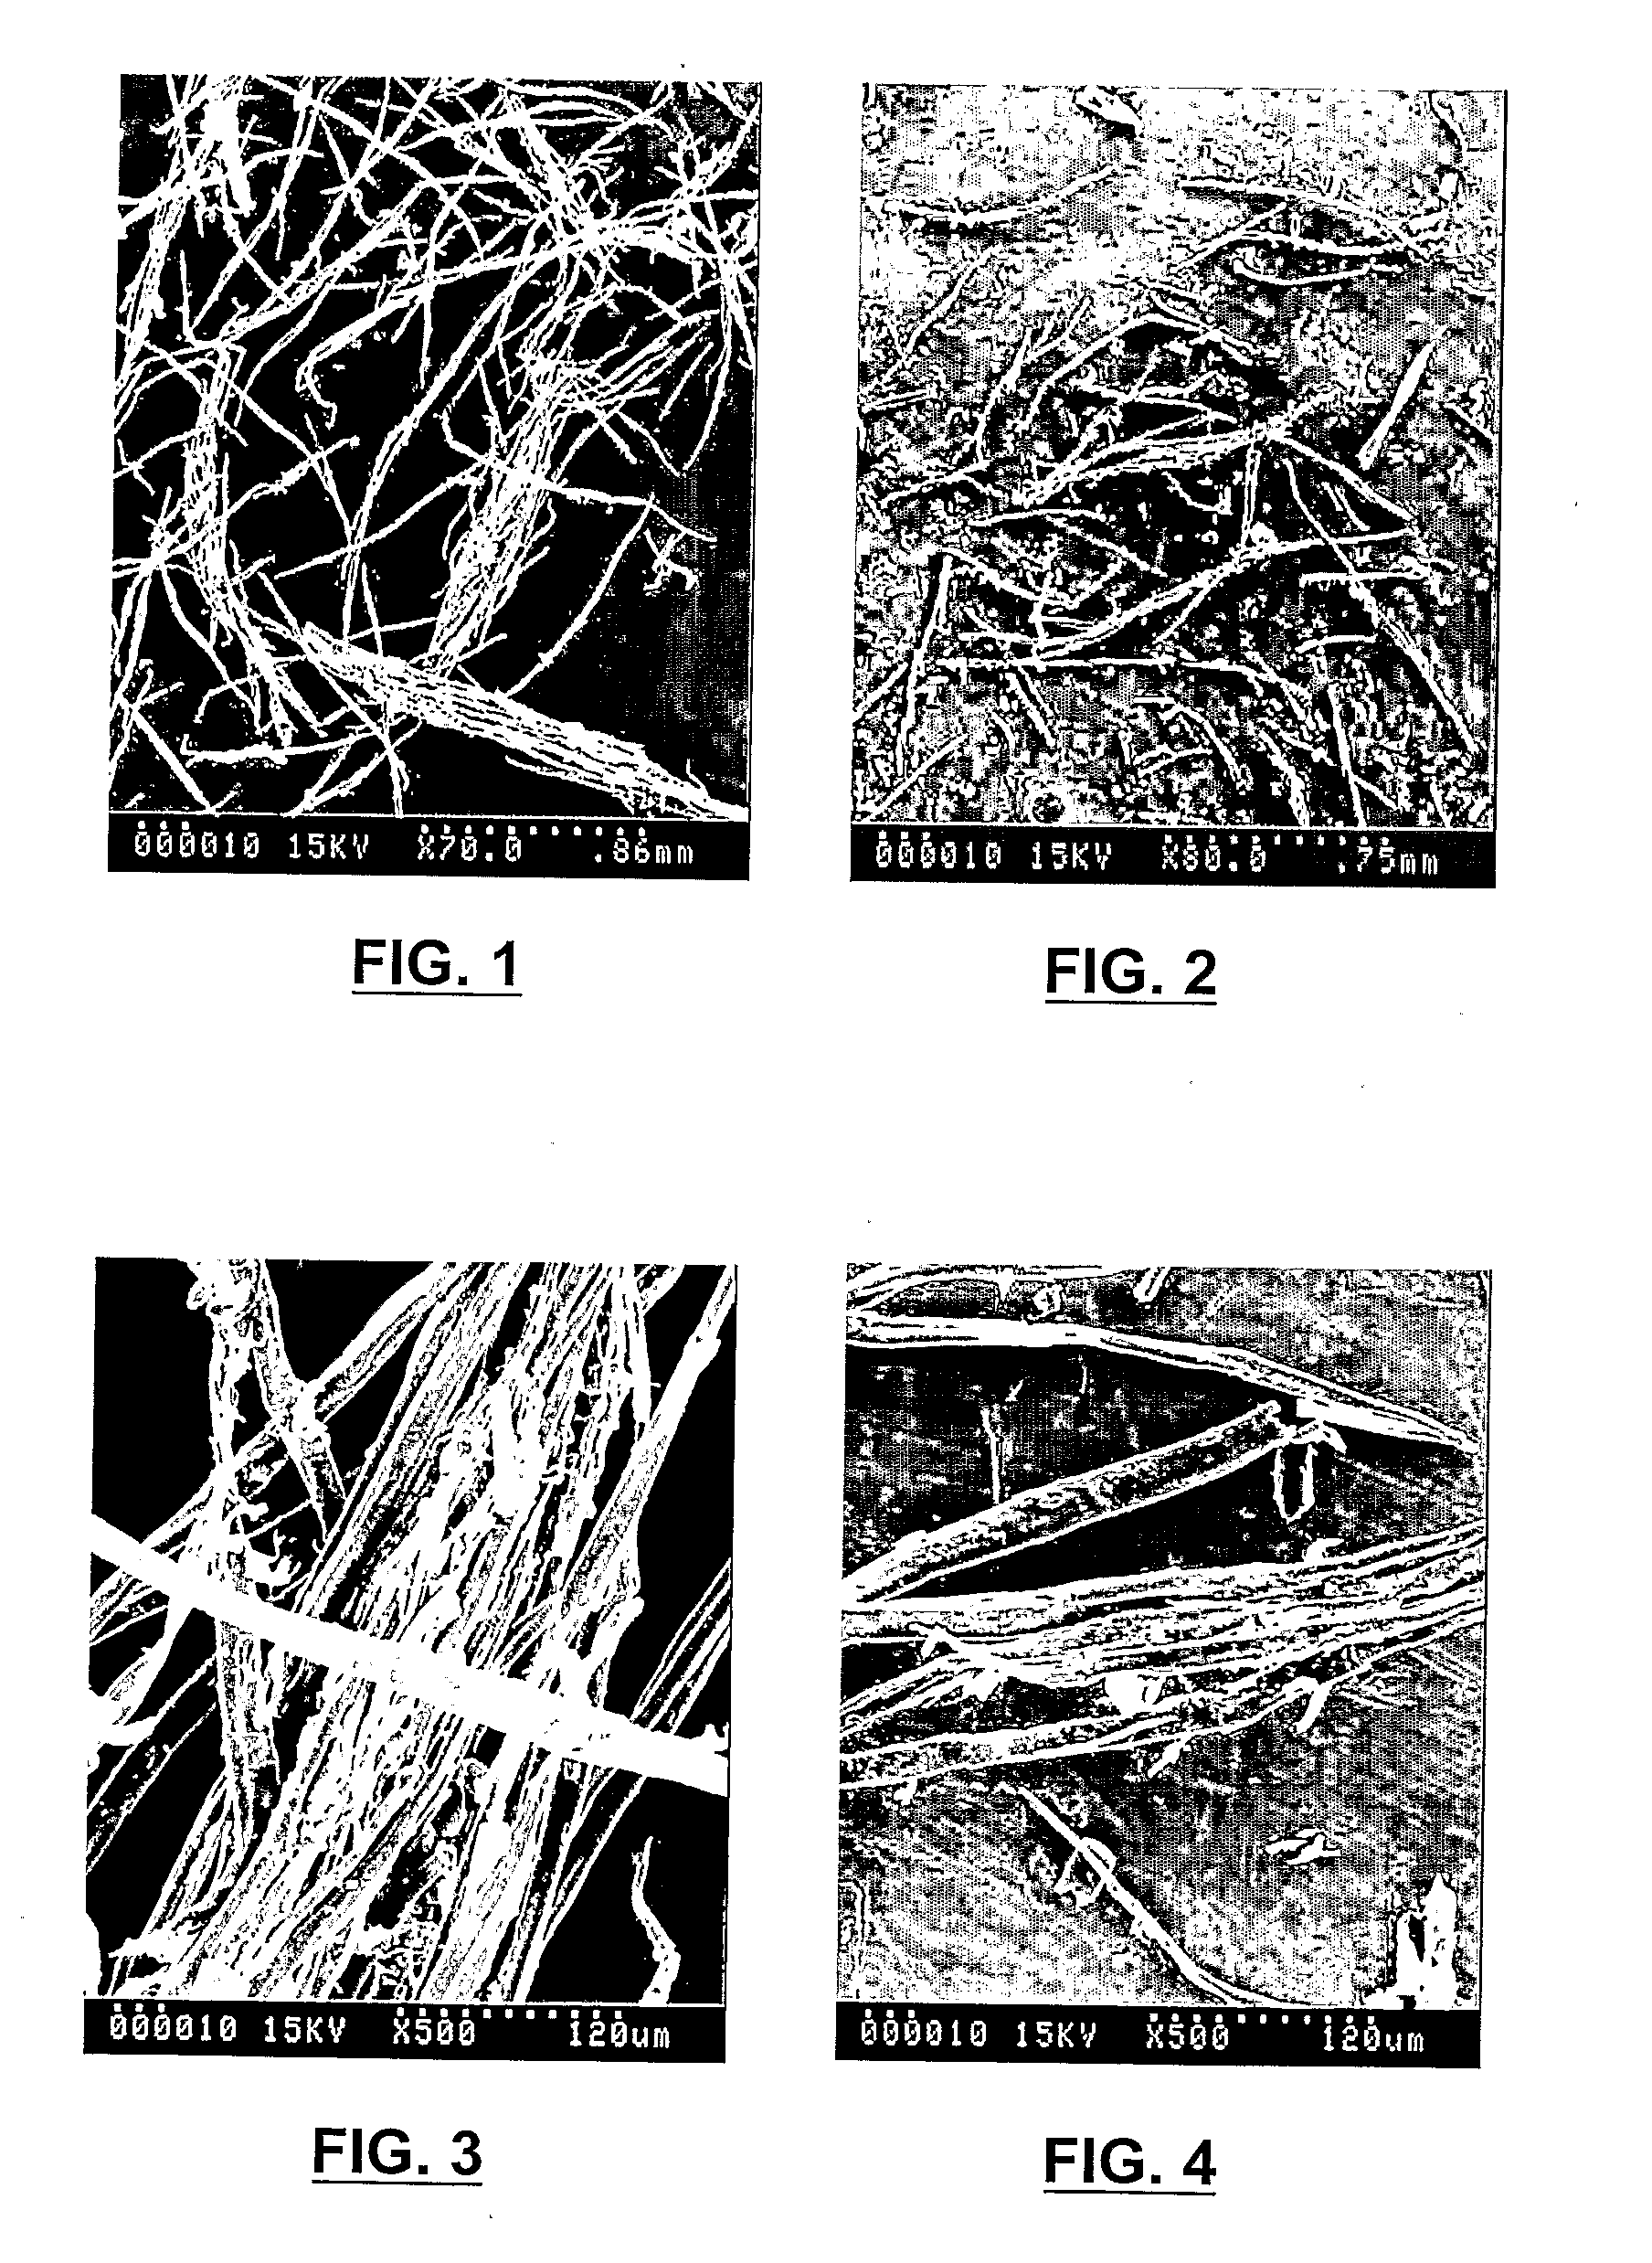 Manufacturing process for high performance lignocellulosic fibre composite materials